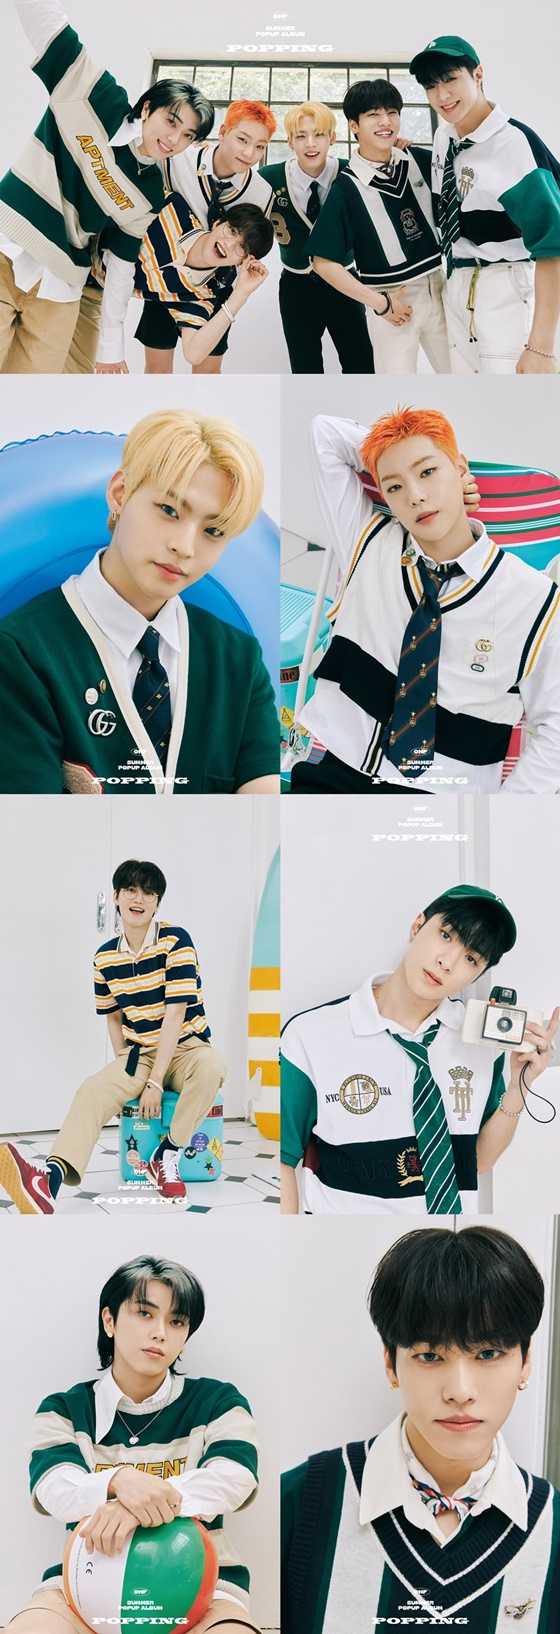 WM Entertainment, a subsidiary company, released a new concept photo group cut and a personal cut of the summer pop-up album POPPING which will be released on August 9th on the ONF official SNS channel on the 6th.The ONF members in the open concept photo are giving off bright and cheerful energy with casual and energetic Sukluk styling.Summer atmosphere such as ball, tube, surfboard, and other accessories and white space added a clear and cool atmosphere to further enhance the fresh atmosphere of Summer album.Especially, the free and personalityful eyes and poses of the members who express the concept in their own way are filled with ONFs unique charm, and attention is focused on the soft concept that will be more ripe with this album.ONF is the first full-length album released in February and the repackaged album released in April. It has won the top of various domestic music sites, achieving its own first sales record, achieving 10 million views of the shortest time music video, and winning the first music broadcast after debut.In addition, it has proved its stronger global influence with the attention of the United States of America economic magazine Forbes and the United States of America famous media TIME.ONF will release the summer pop-up album POPPING through various music sites at 6 pm on the 9th day.